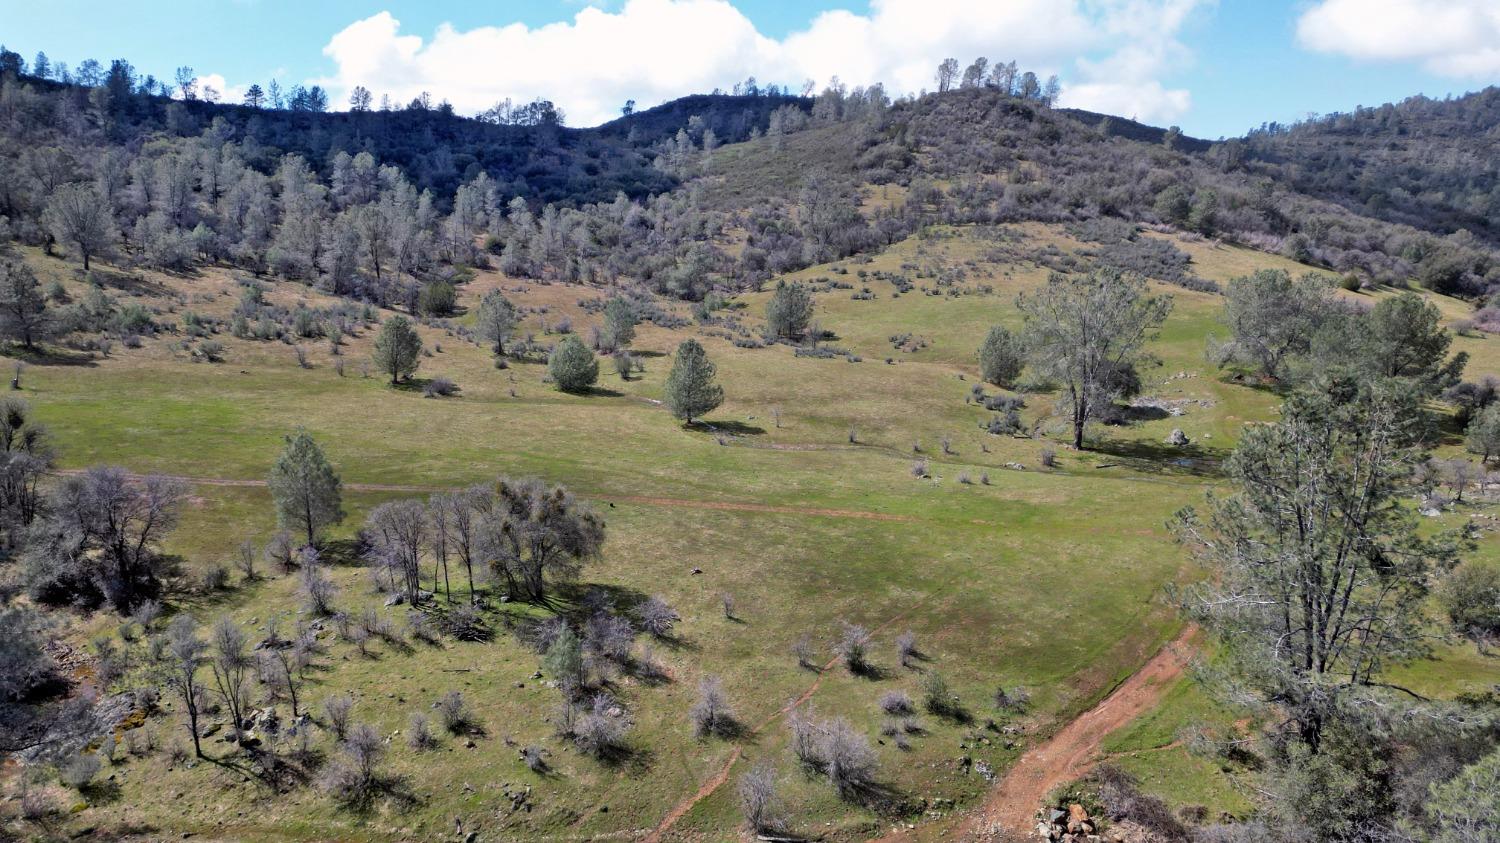 Photo of Tbd Blacks Creek Rd in Coulterville, CA